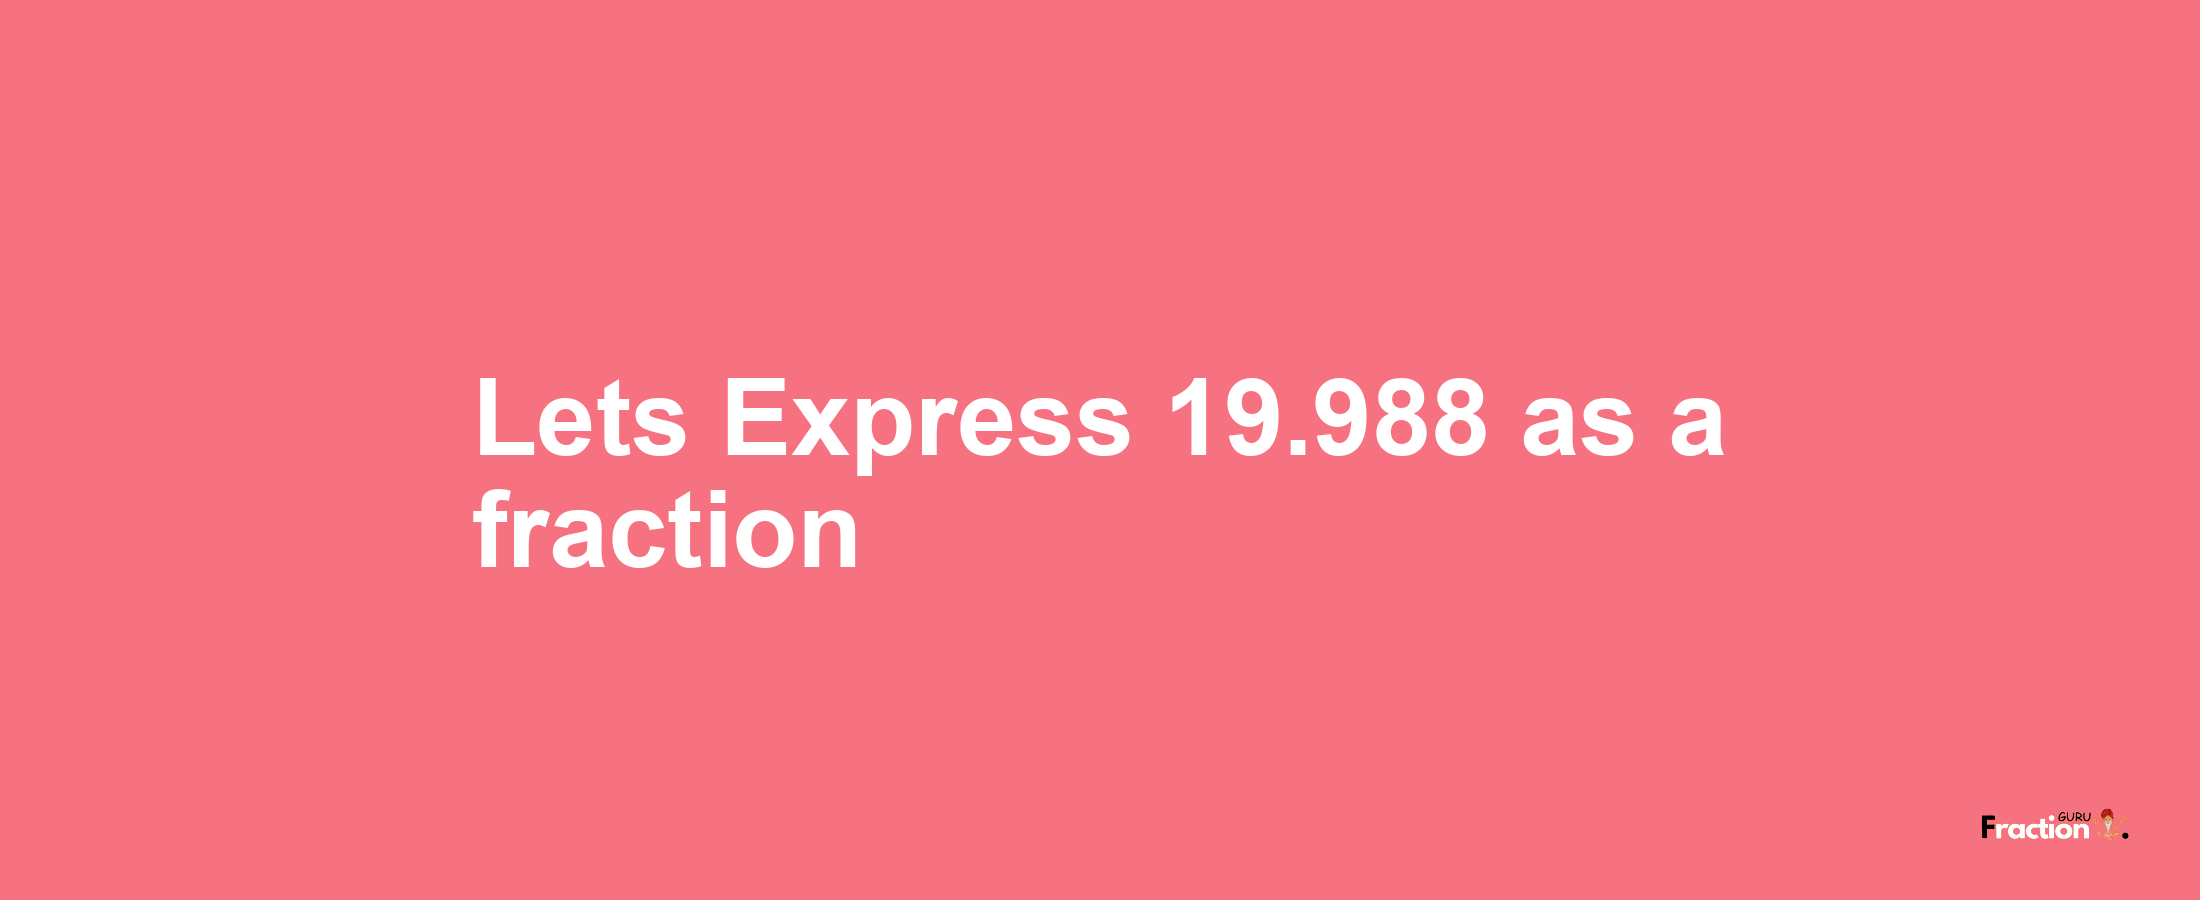 Lets Express 19.988 as afraction